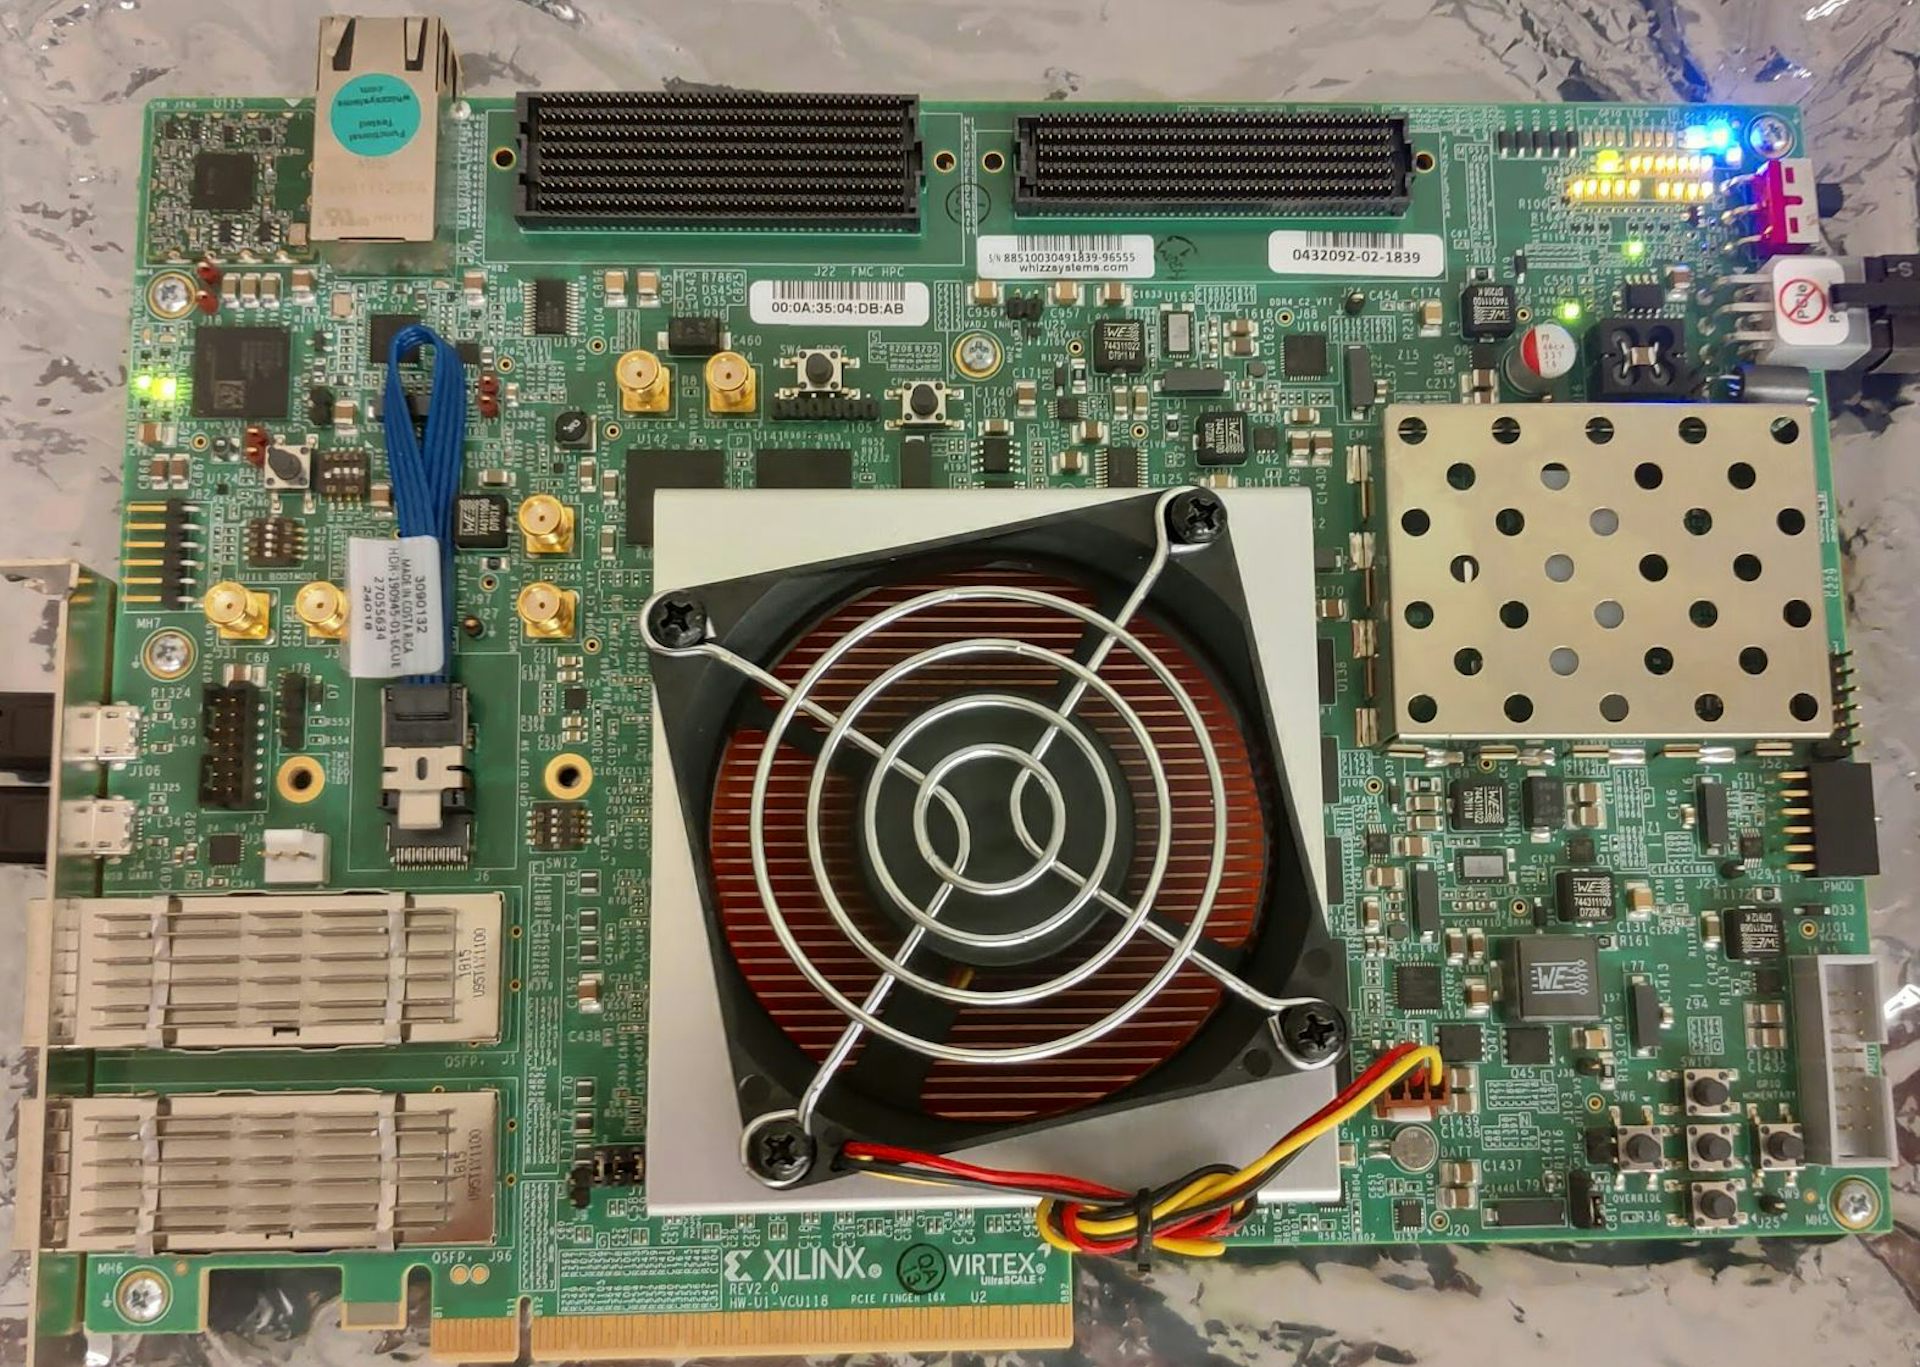 A fan on top of a metal square in the middle of a computer circuit board